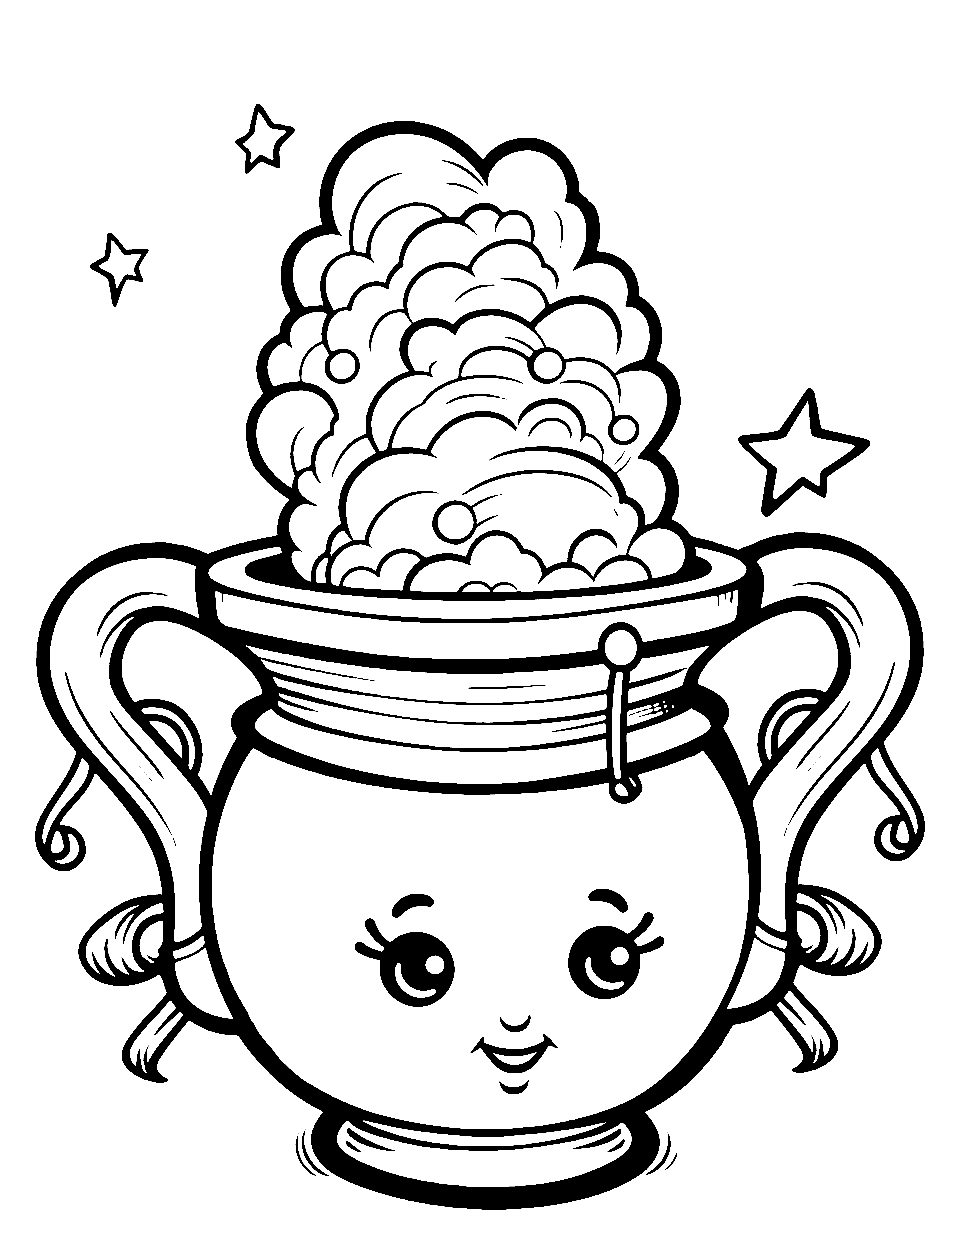 Magic Potion Mix Coloring Page - Wizard brewing a magical potion in a bubbling Shopkin cauldron.